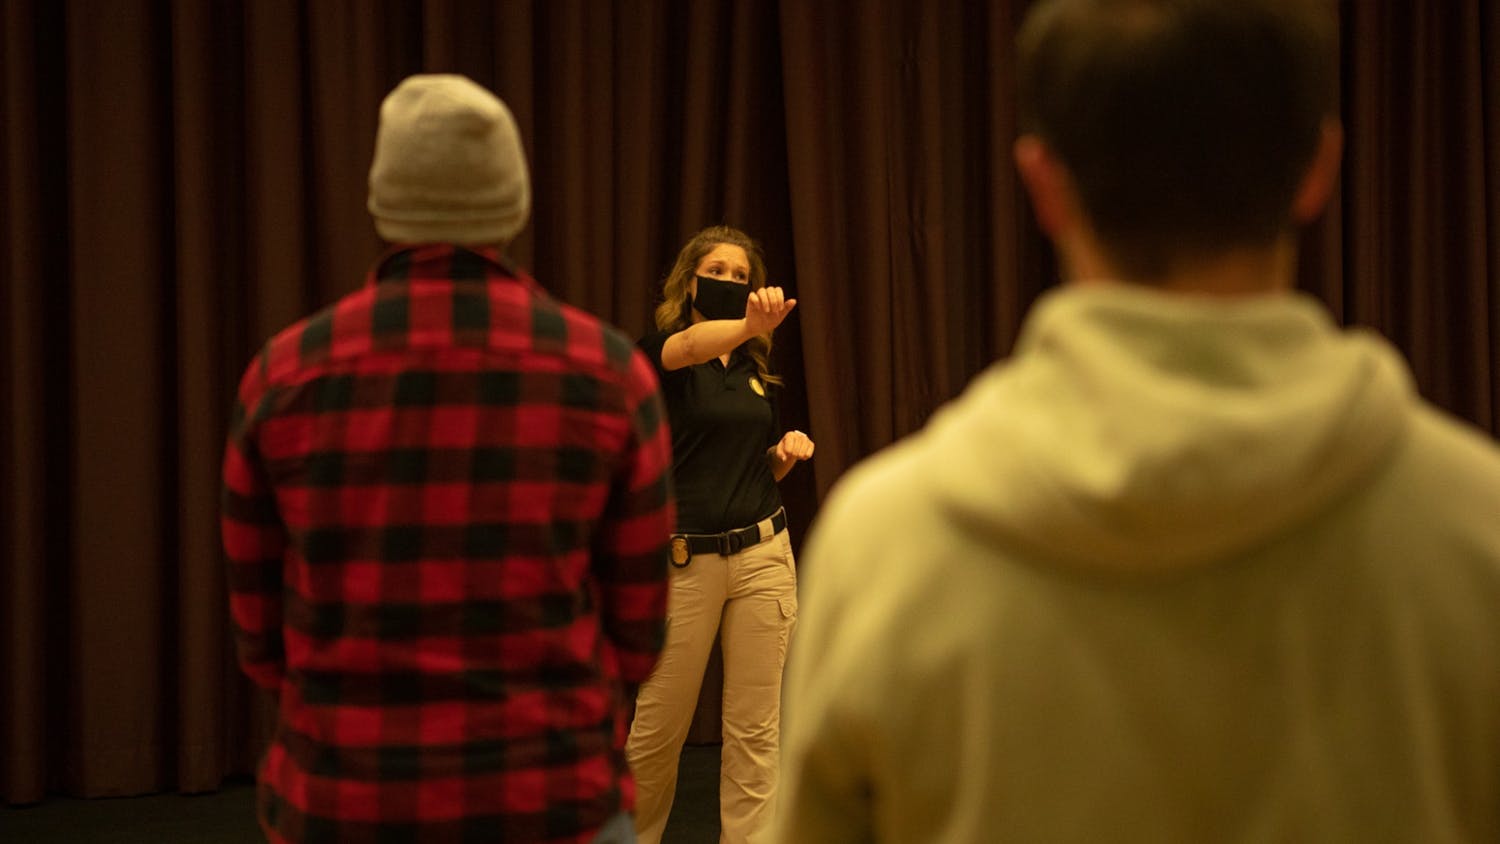 Lt. Jessica Velders demonstrates how to hit an attacker during a self-defense class on Feb. 10, 2022. Sessions like these are hosted by USCPD for student government’s annual Safety Week.